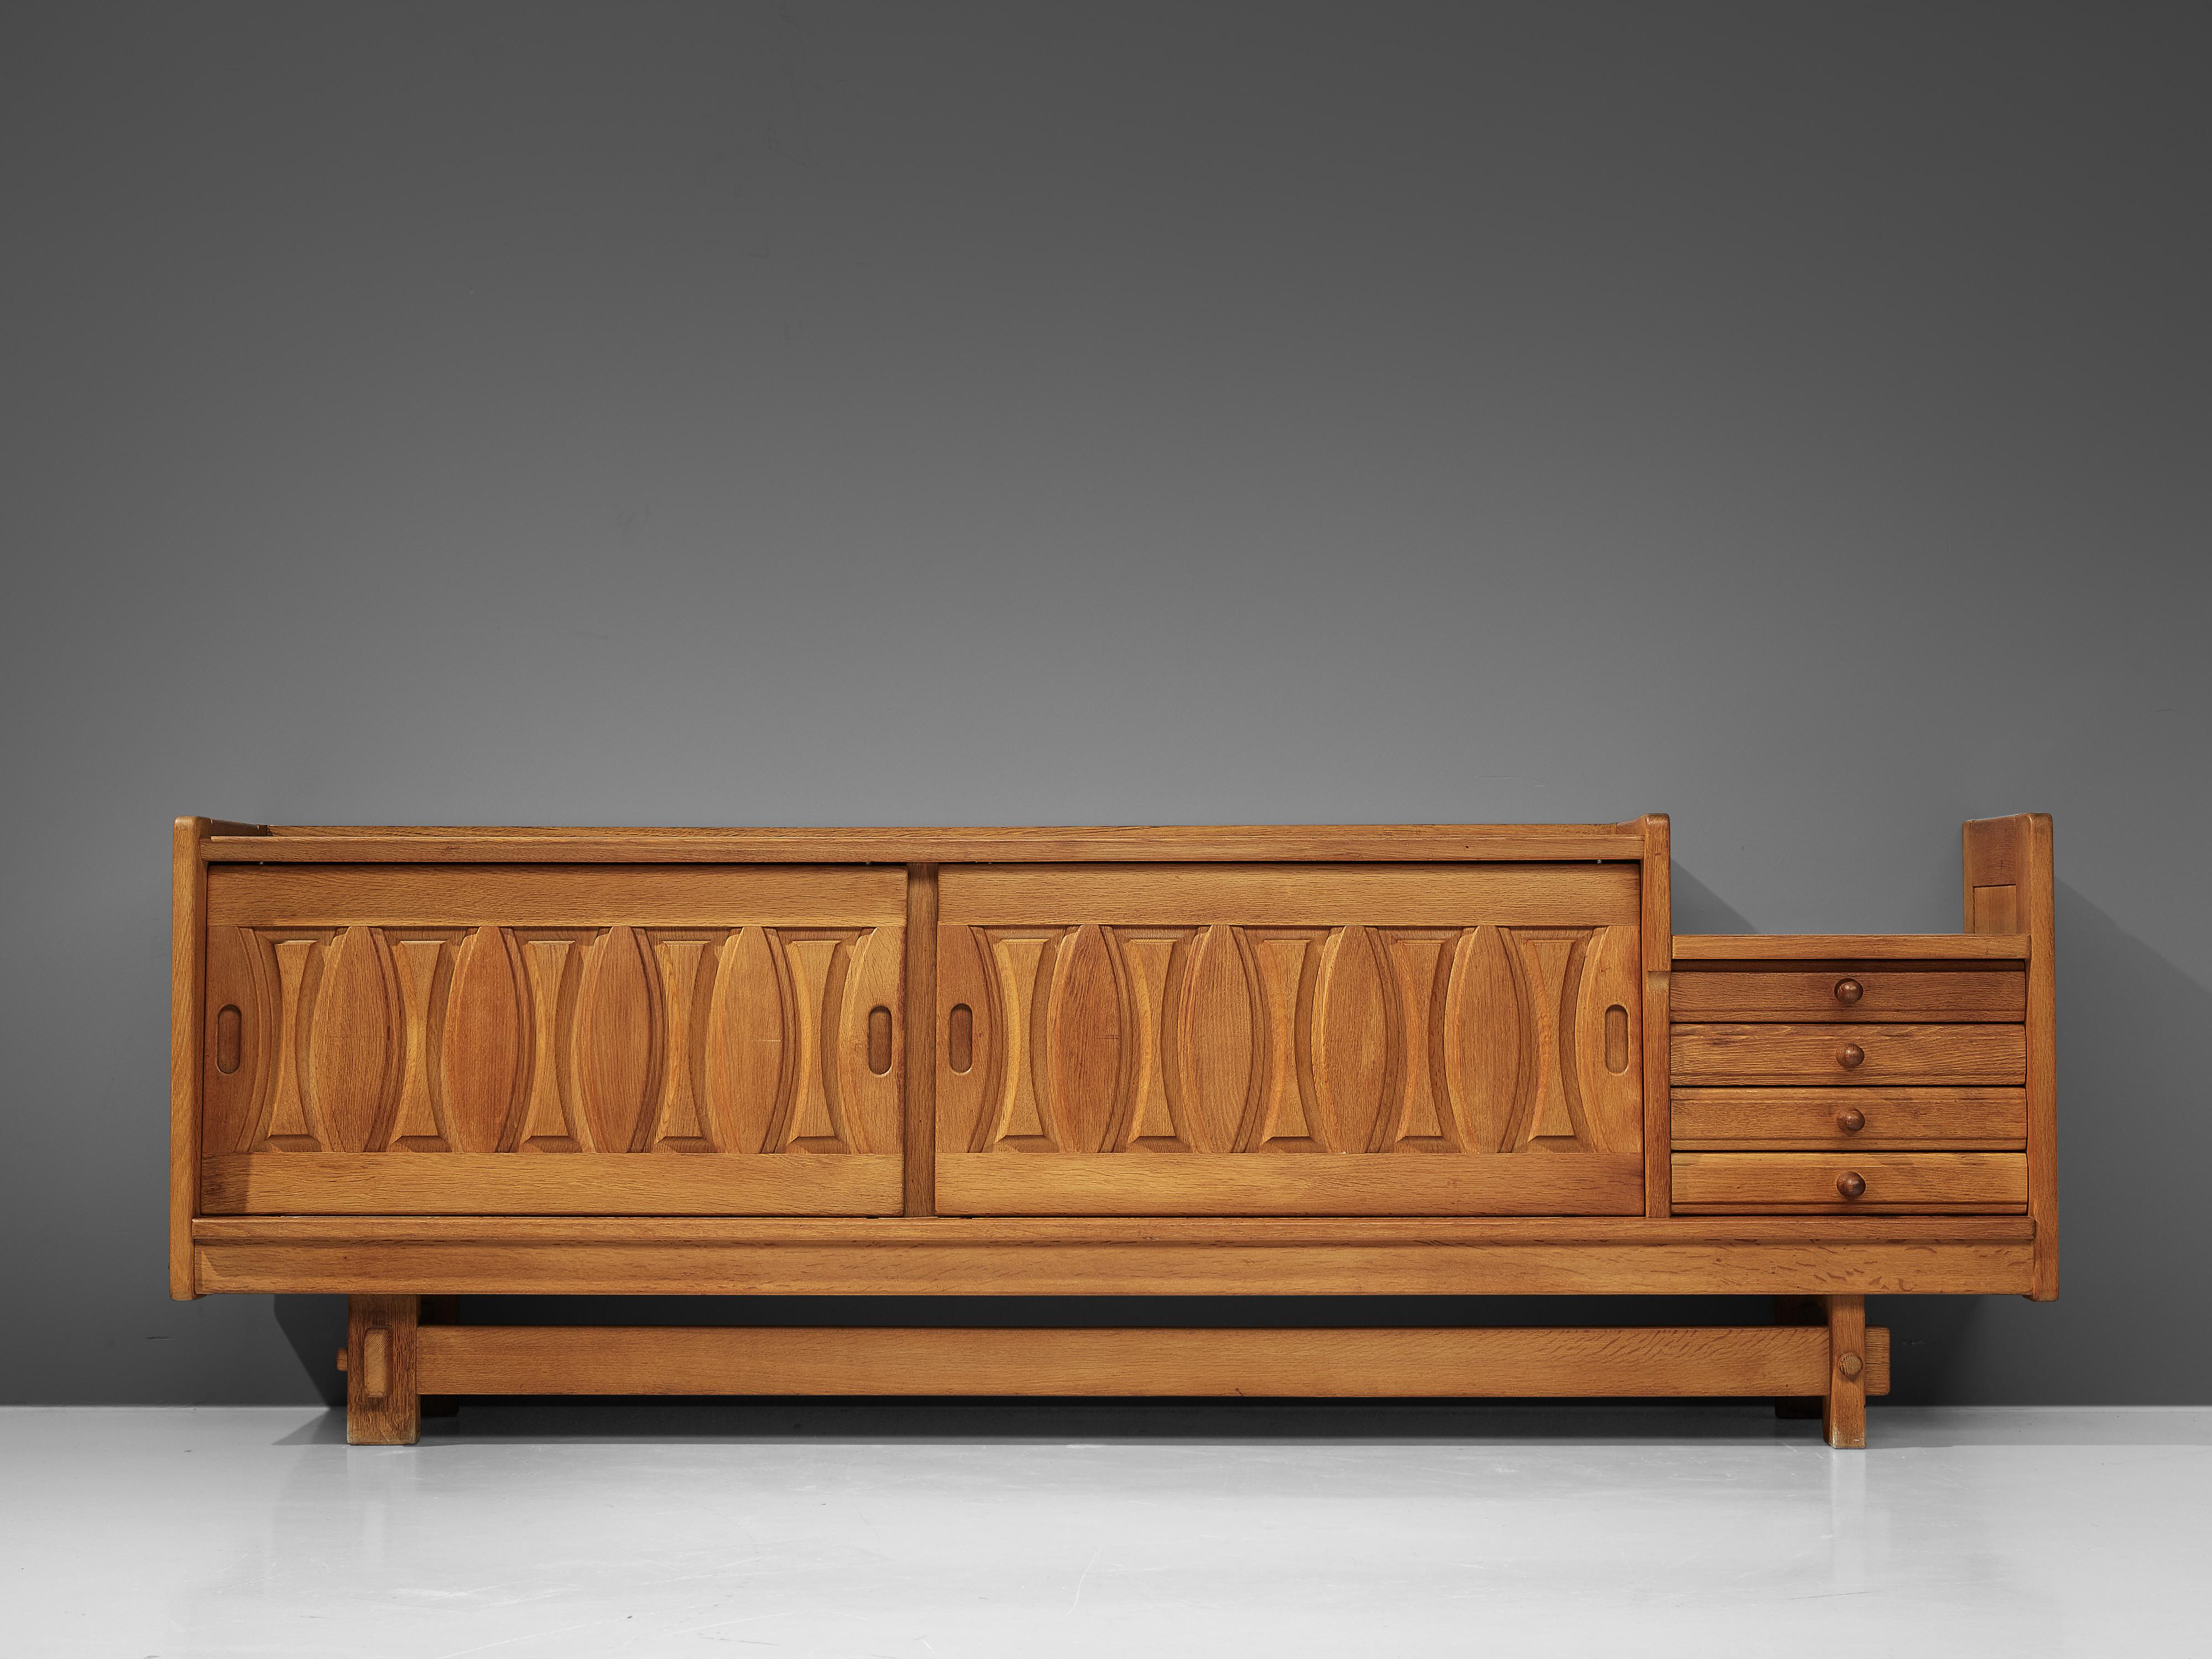 Guillerme et Chambron, sideboard, oak, ceramics, France, 1960s

Credenza in oak by French designers Guillerme & Chambron. This sideboard is equipped with two sliding doors and a set of drawers. The front of the sideboard is beautifully detailed with